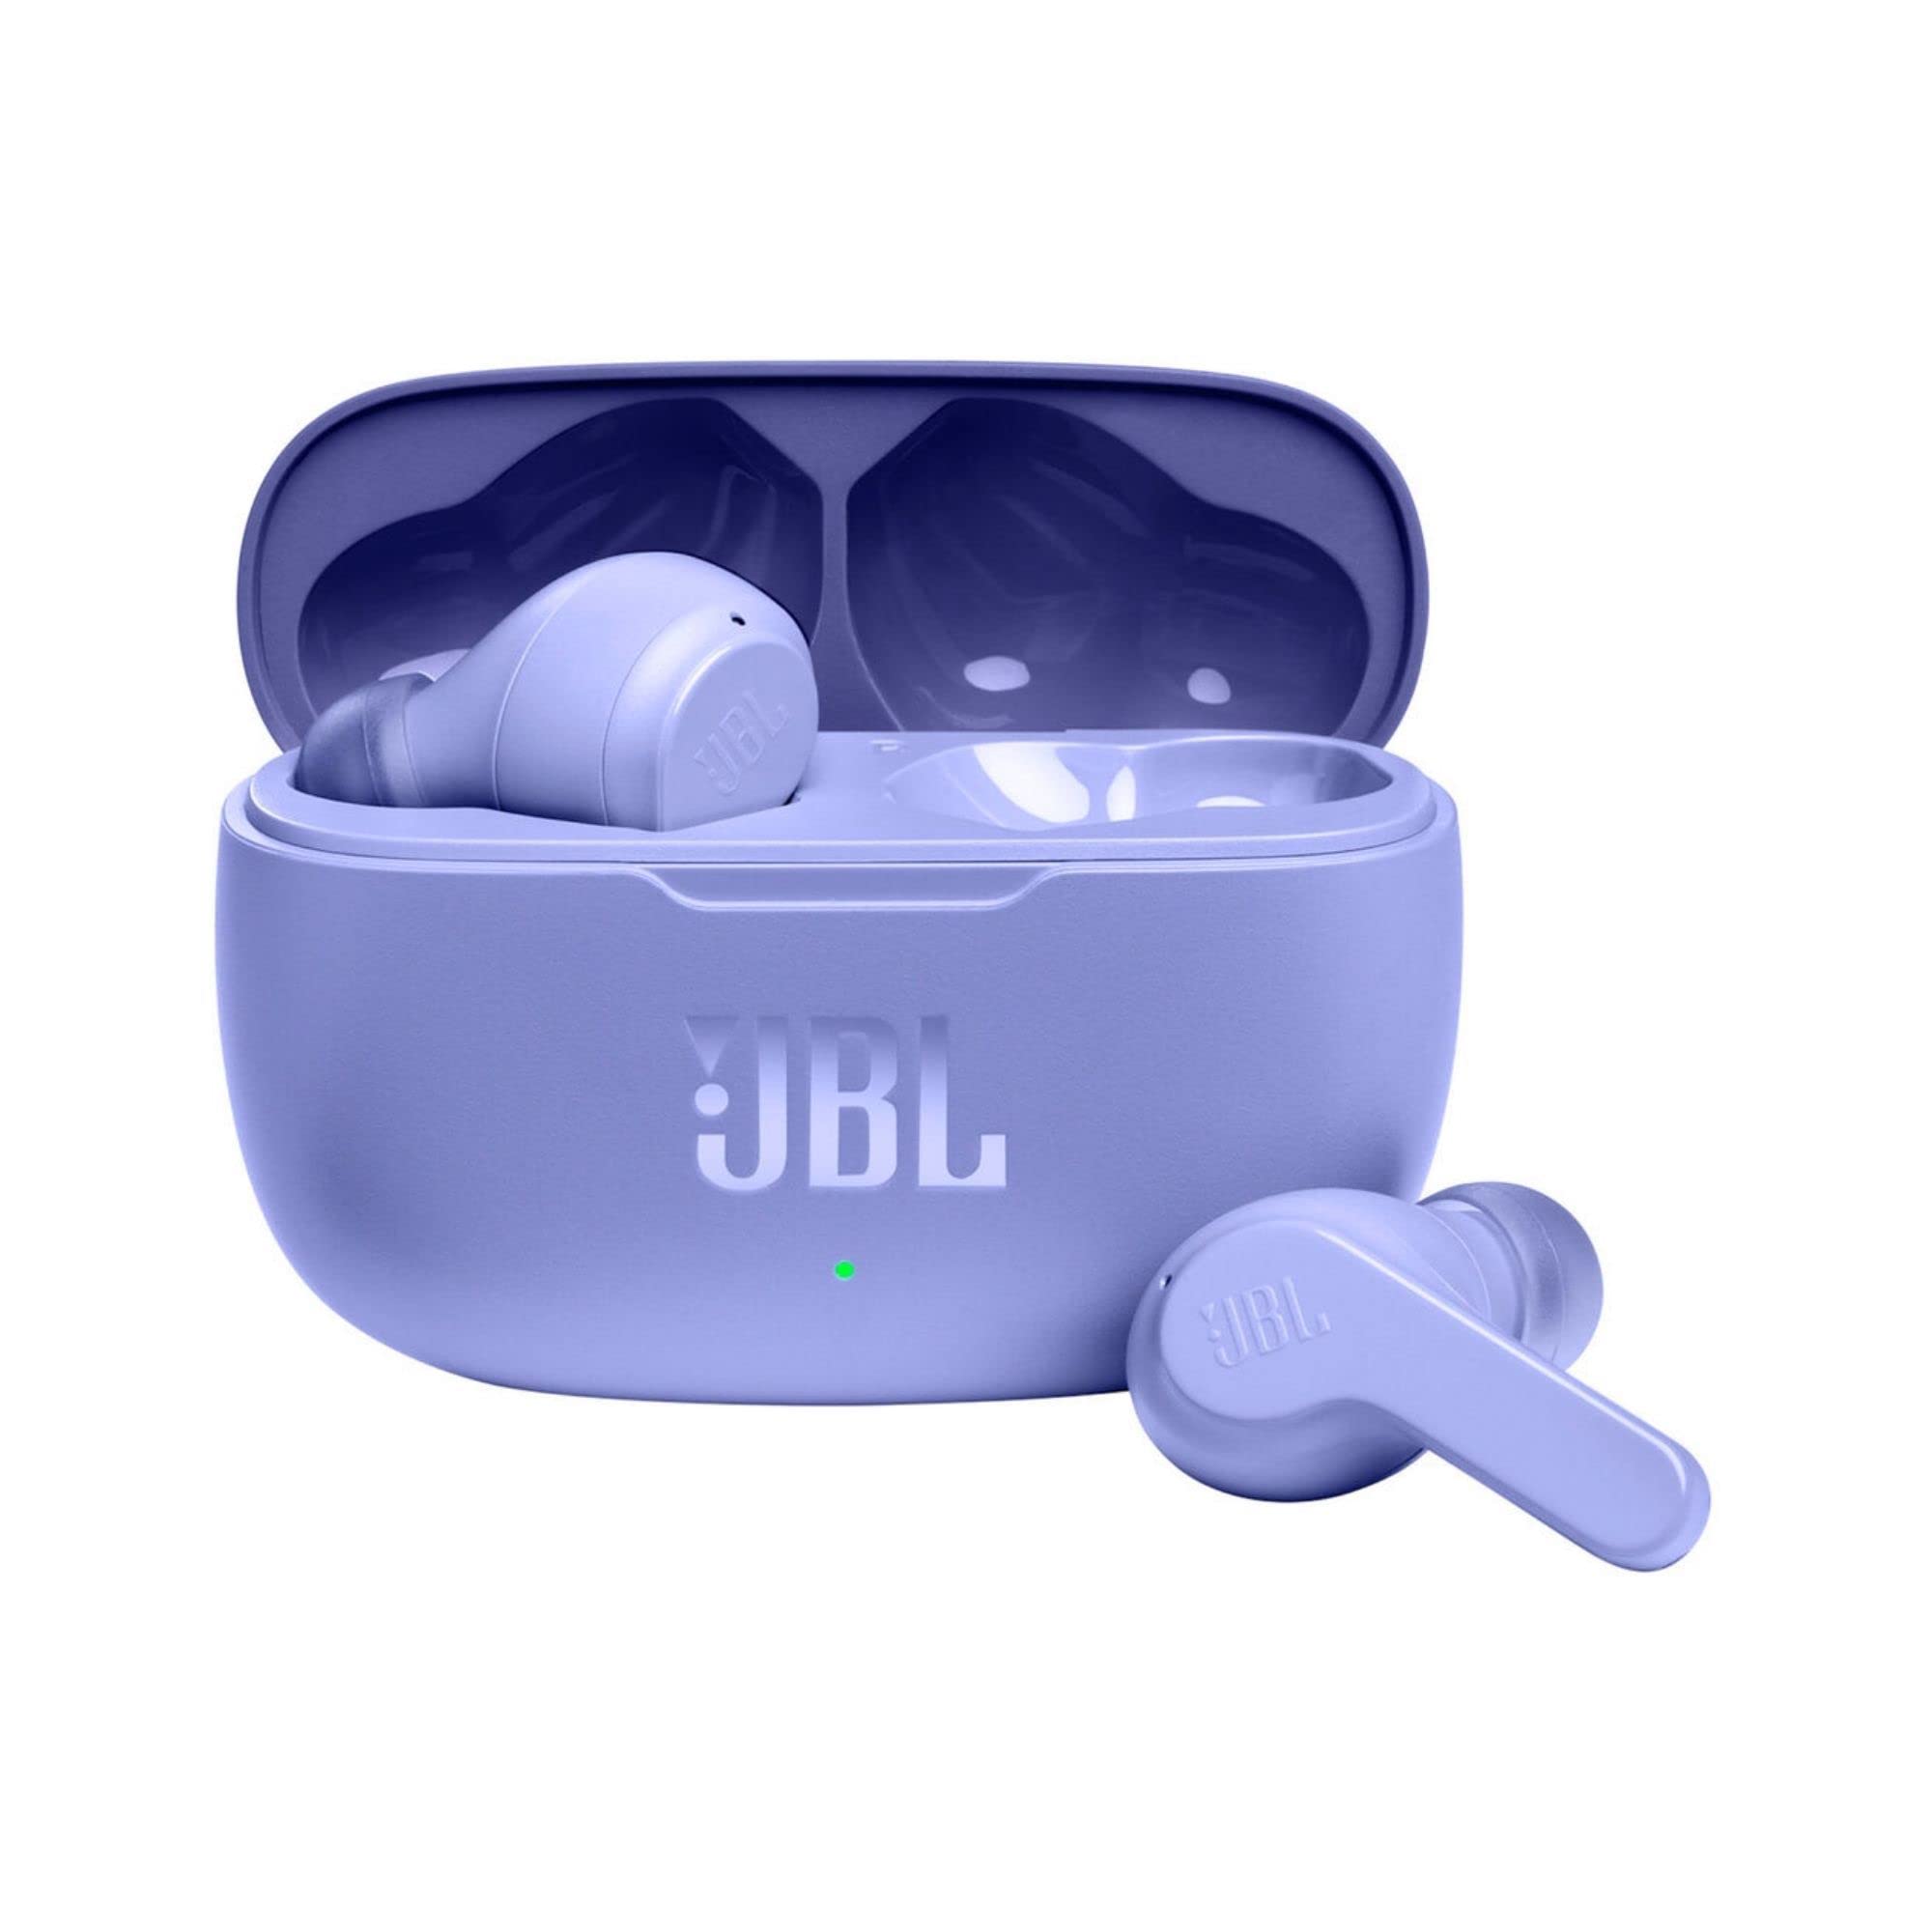 Powering On Your JBL Wireless Earbuds: Quick Instructions